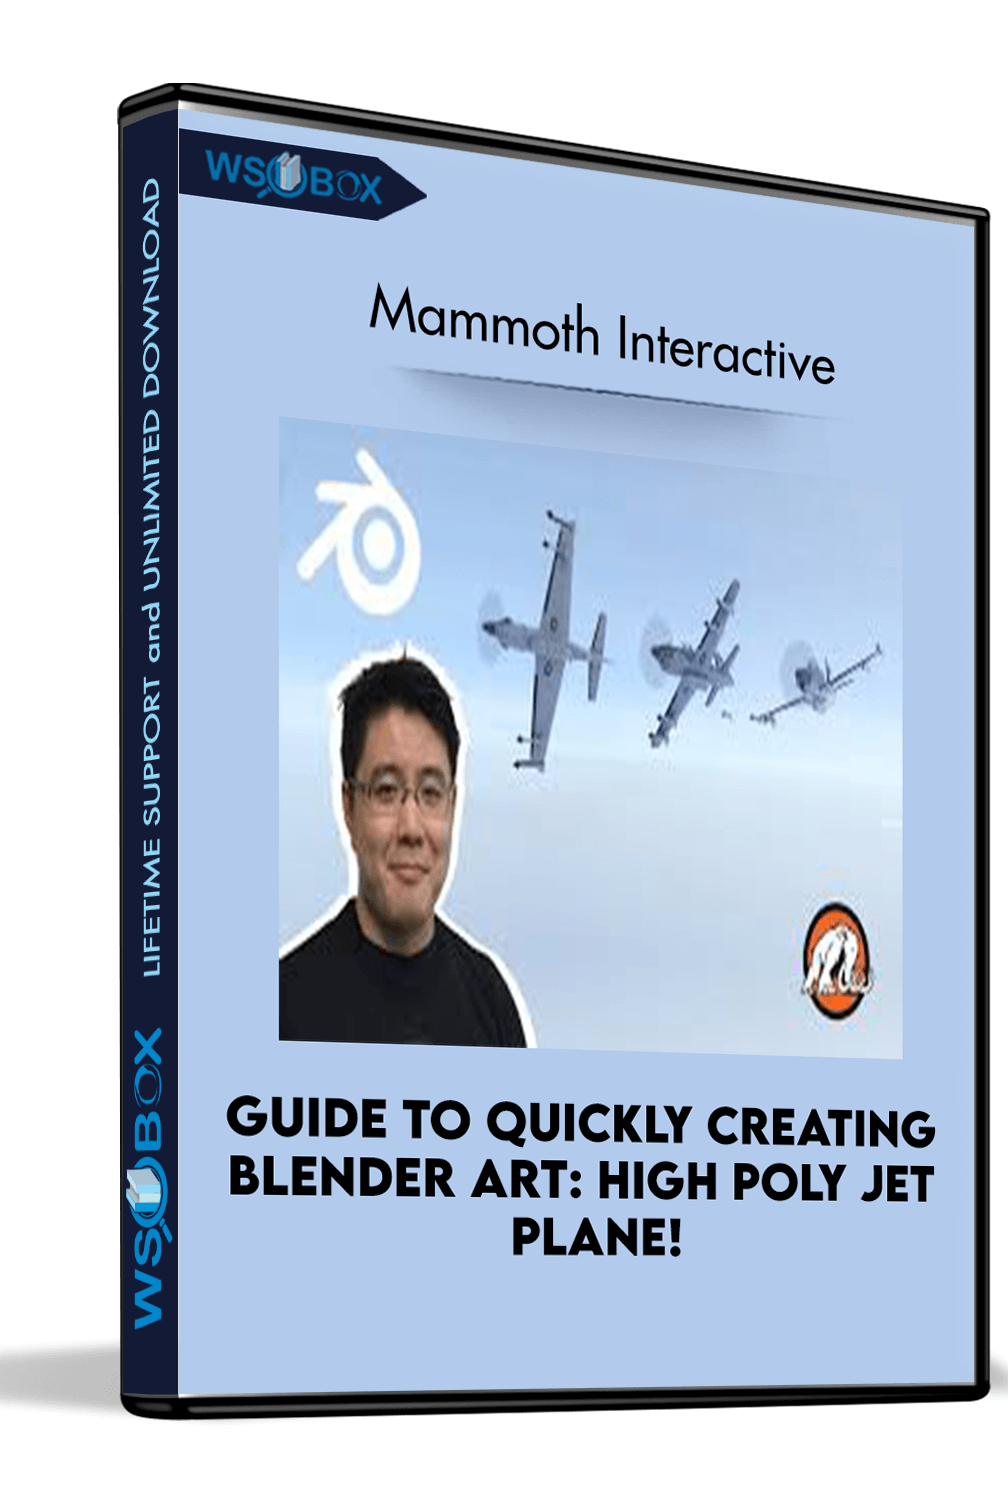 guide-to-quickly-creating-blender-art-high-poly-jet-plane-mammoth-interactive